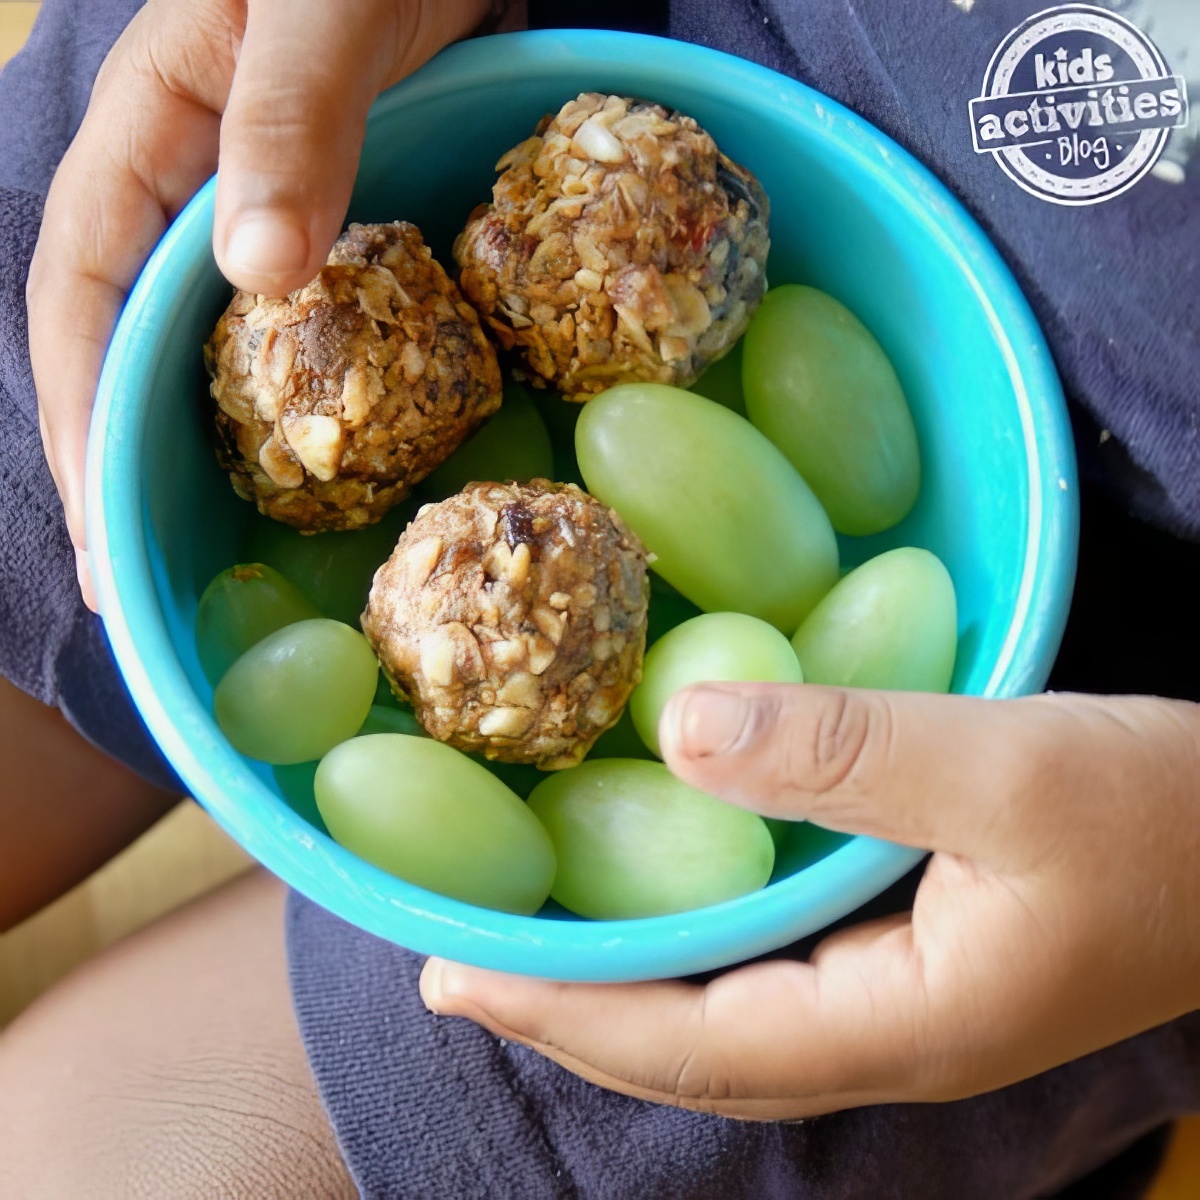 Easy and yummy breakfast balls are in reach with these easy recipe for breakfast!